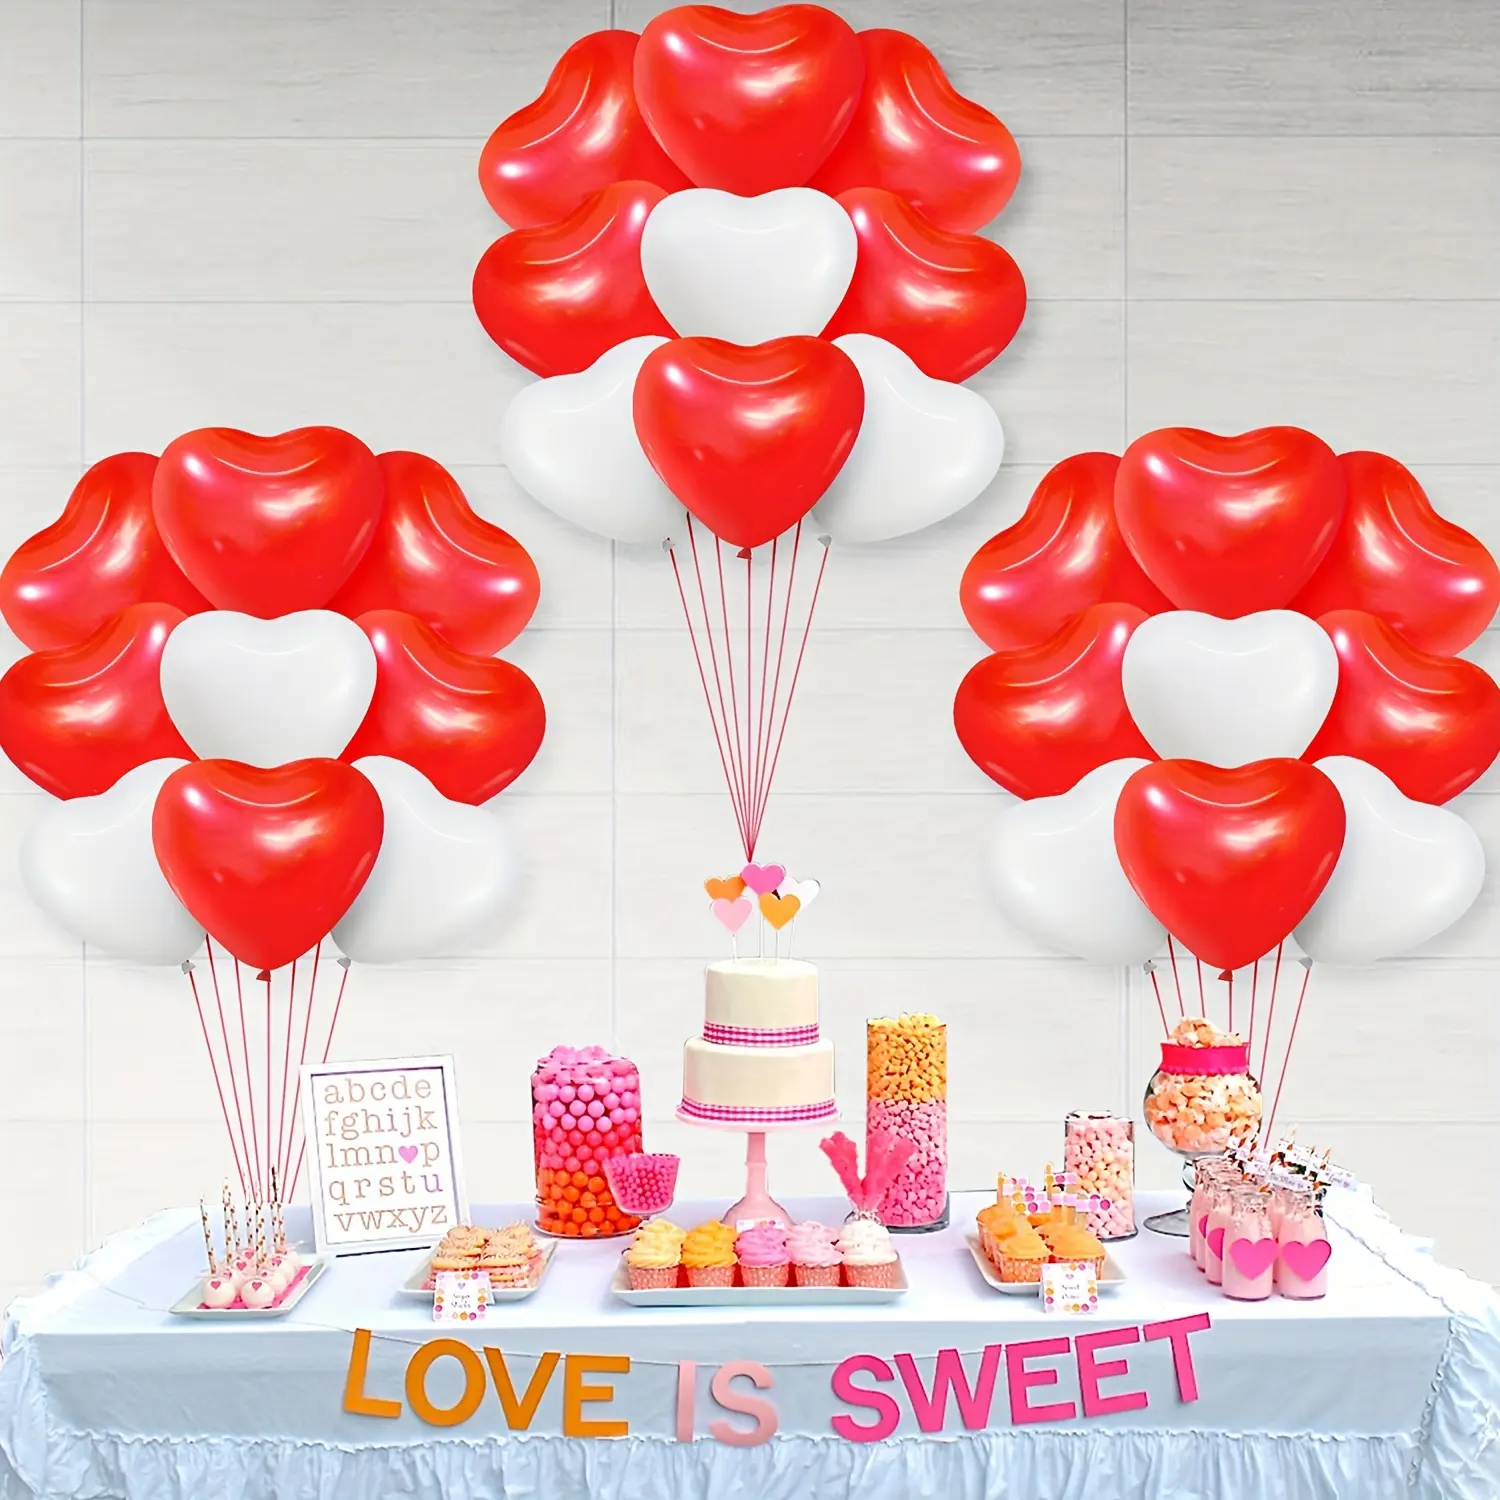 New 30pcs Red White Heart Shaped Balloons Valentine's Day Anniversary Romantic Decoration Heart Shaped Balloons